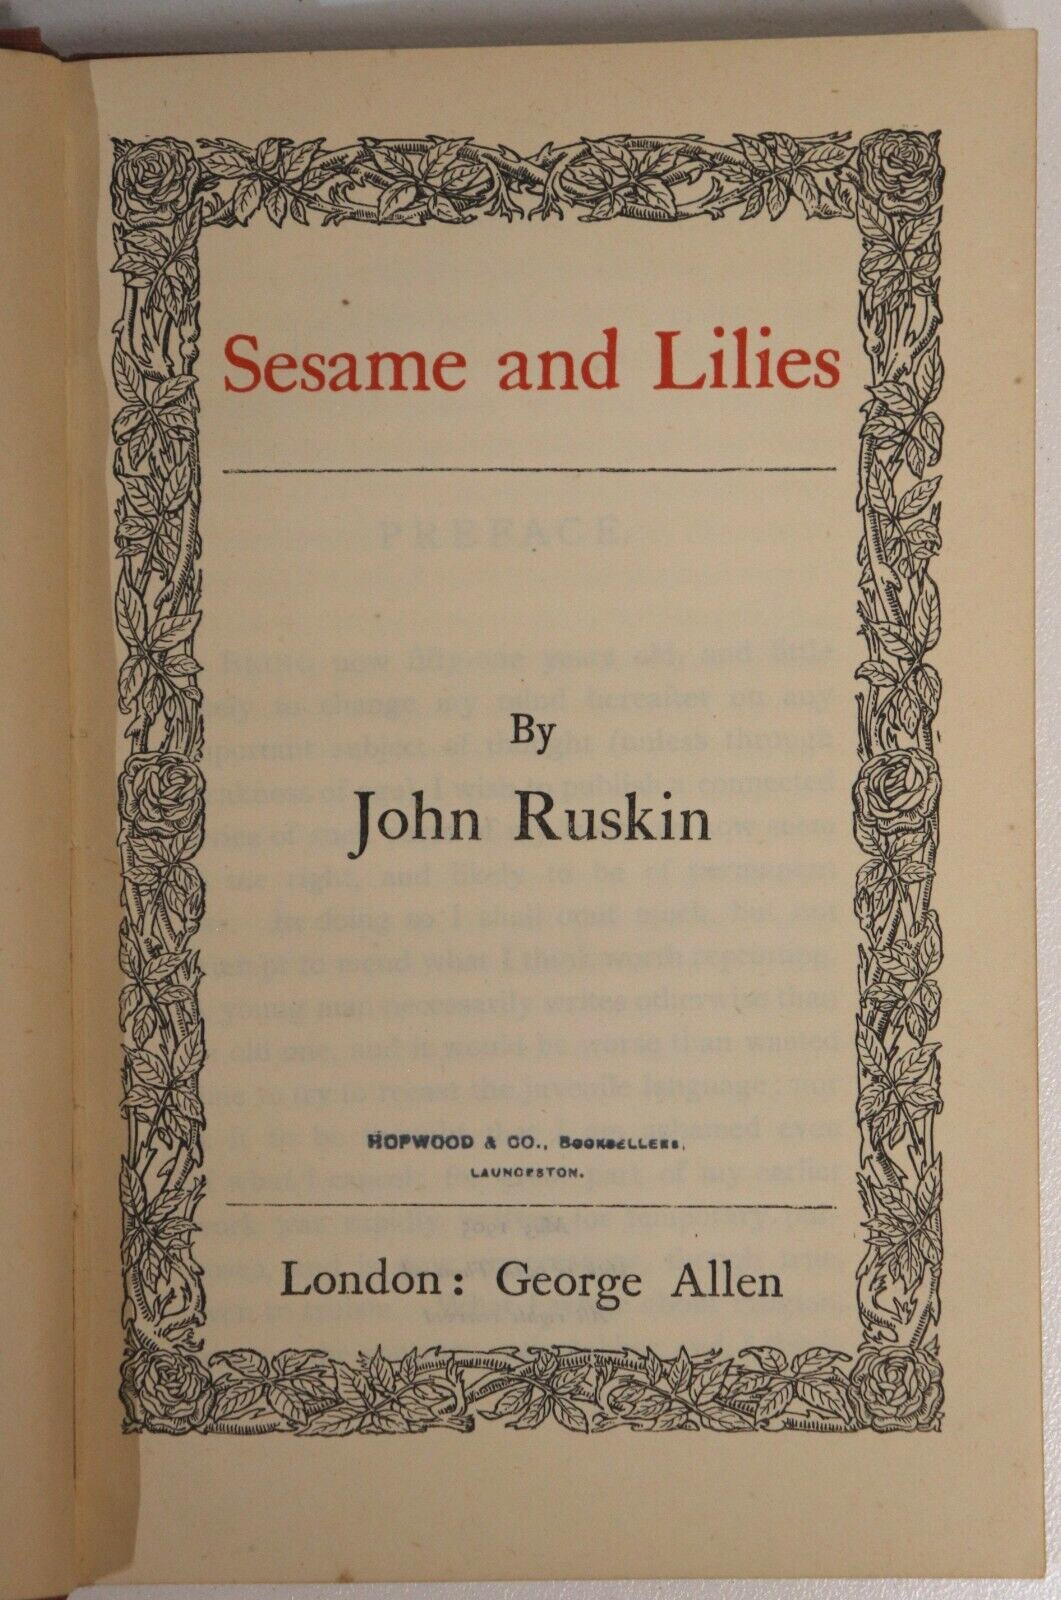 Sesame and Lilies by John Ruskin - 1905 - Antique Philosophy Book - 0